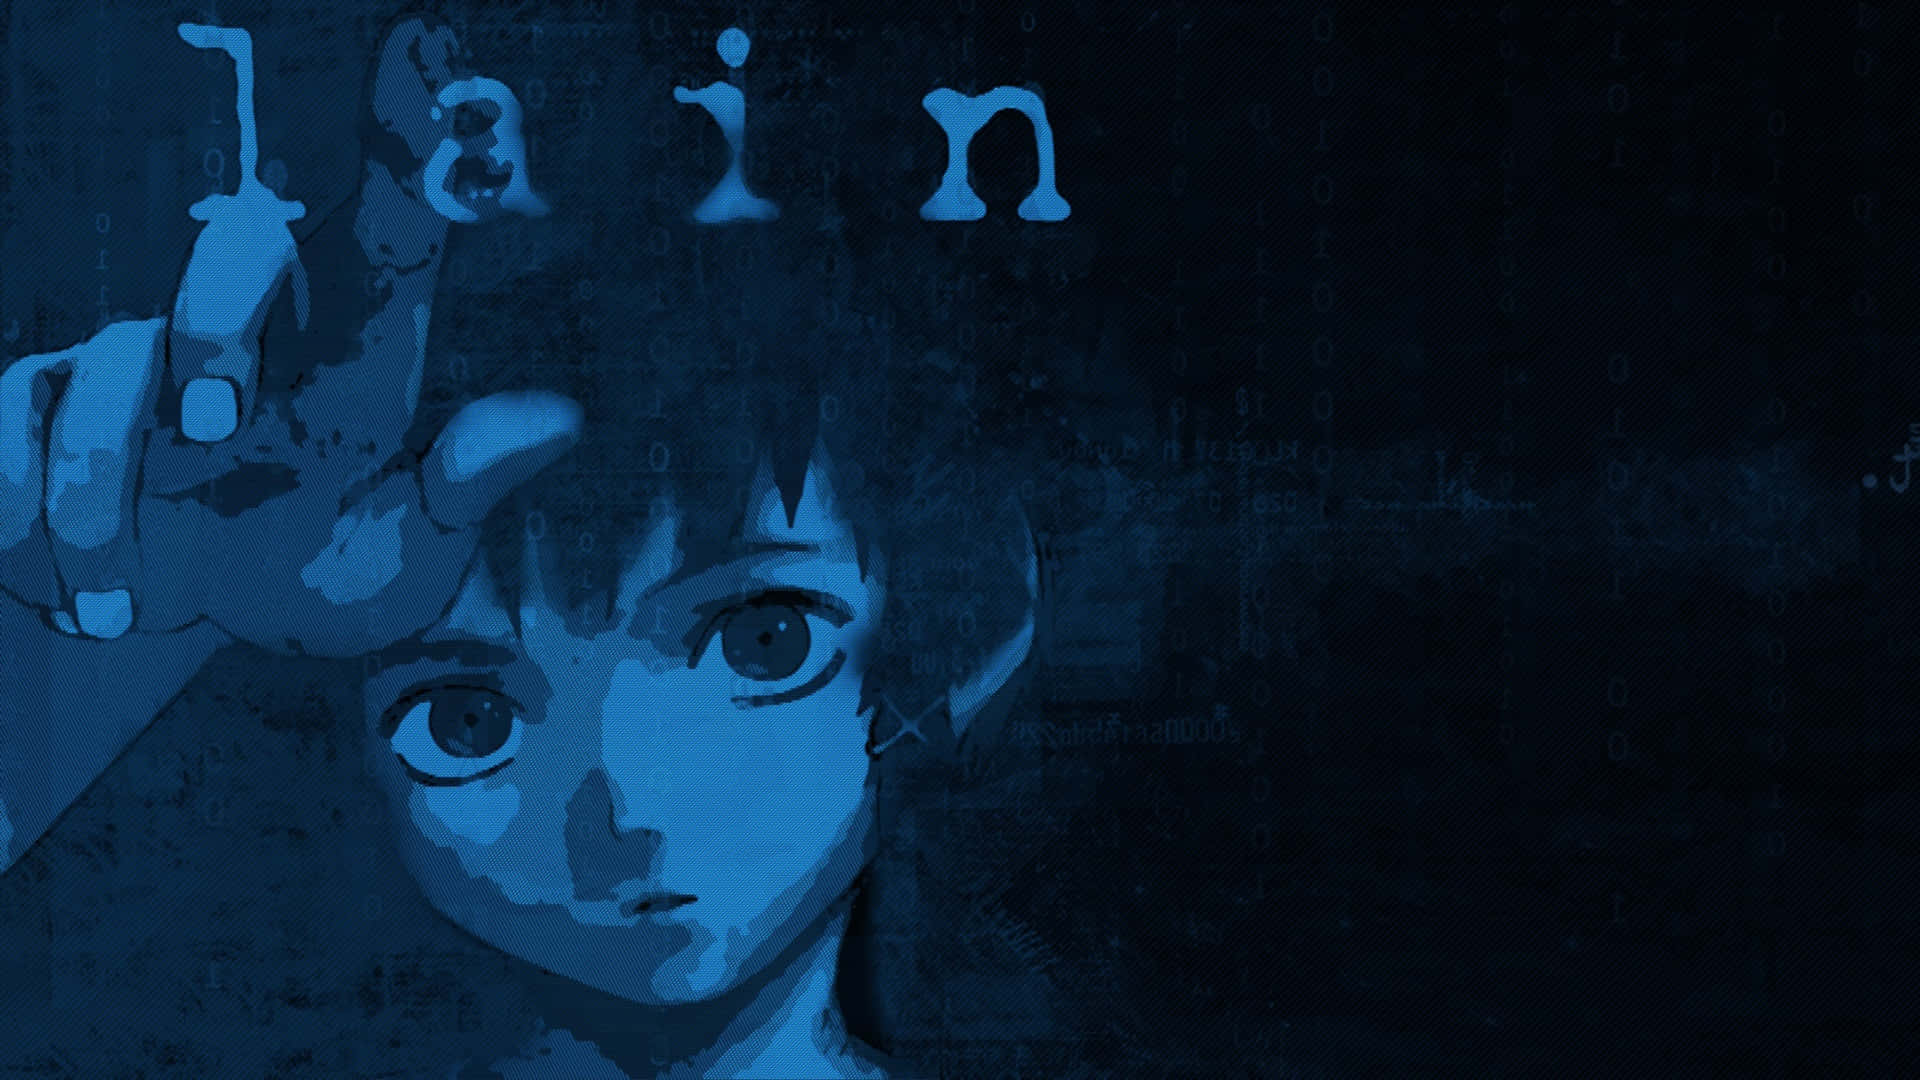 Serial Experiments Lain: The Breaking Point Background